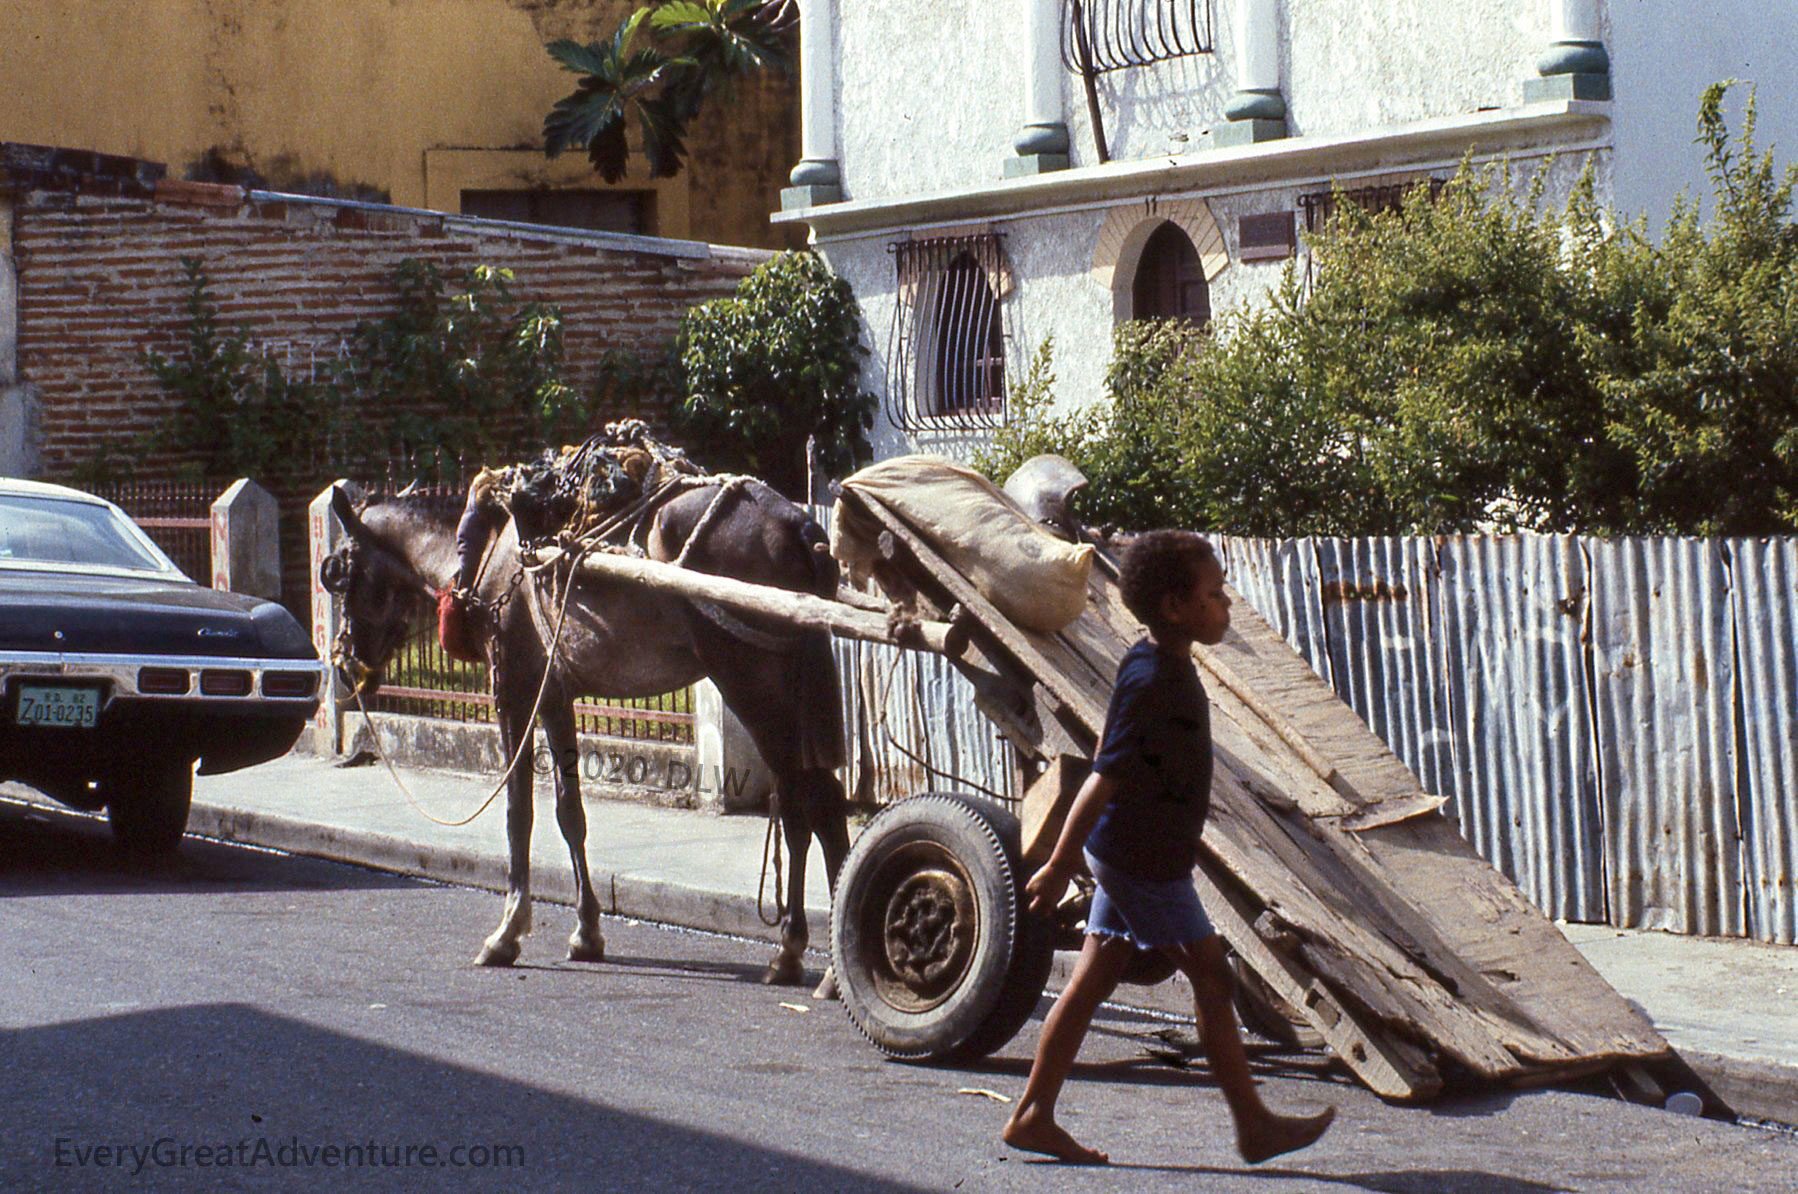 1981 Puerto Plata, Dominican Republic, Street scene, donkey tied to a makeshift cart, with a young boy walking across the street